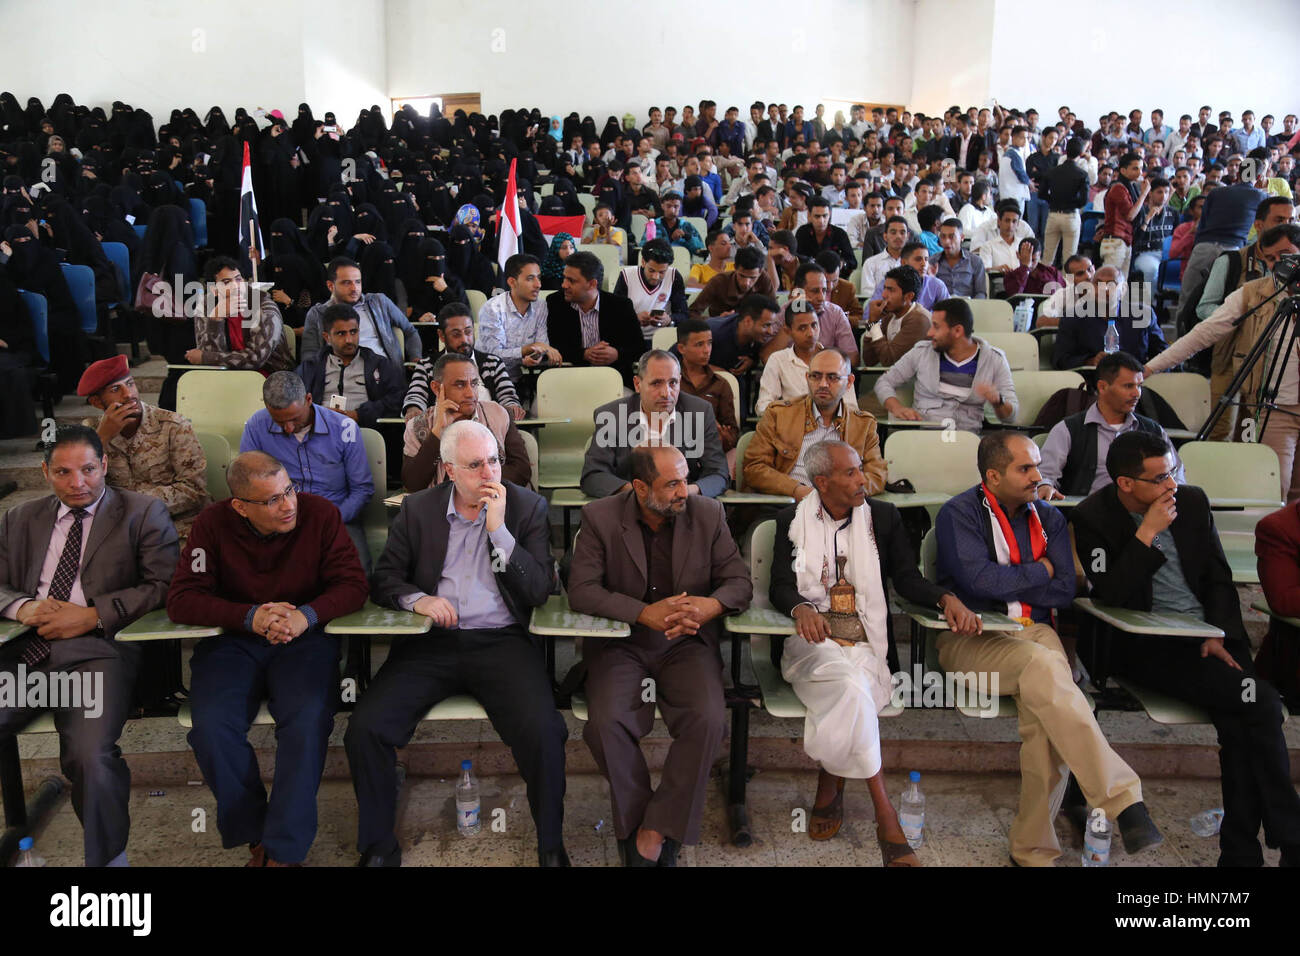 February 9, 2017 - Celebrations have taken place in the university campus of the city of Taiz to commemorate the sixth anniversary of the Arab Spring as well as the Yemeni revolution which toppled former president Ali Abdullah Saleh. The celebrations which included performances and speeches, were attended by political and military leaders of well as members of the Taiz resistance (Credit Image: © Abdulnasser Alseddik/ImagesLive via ZUMA Wire) Stock Photo